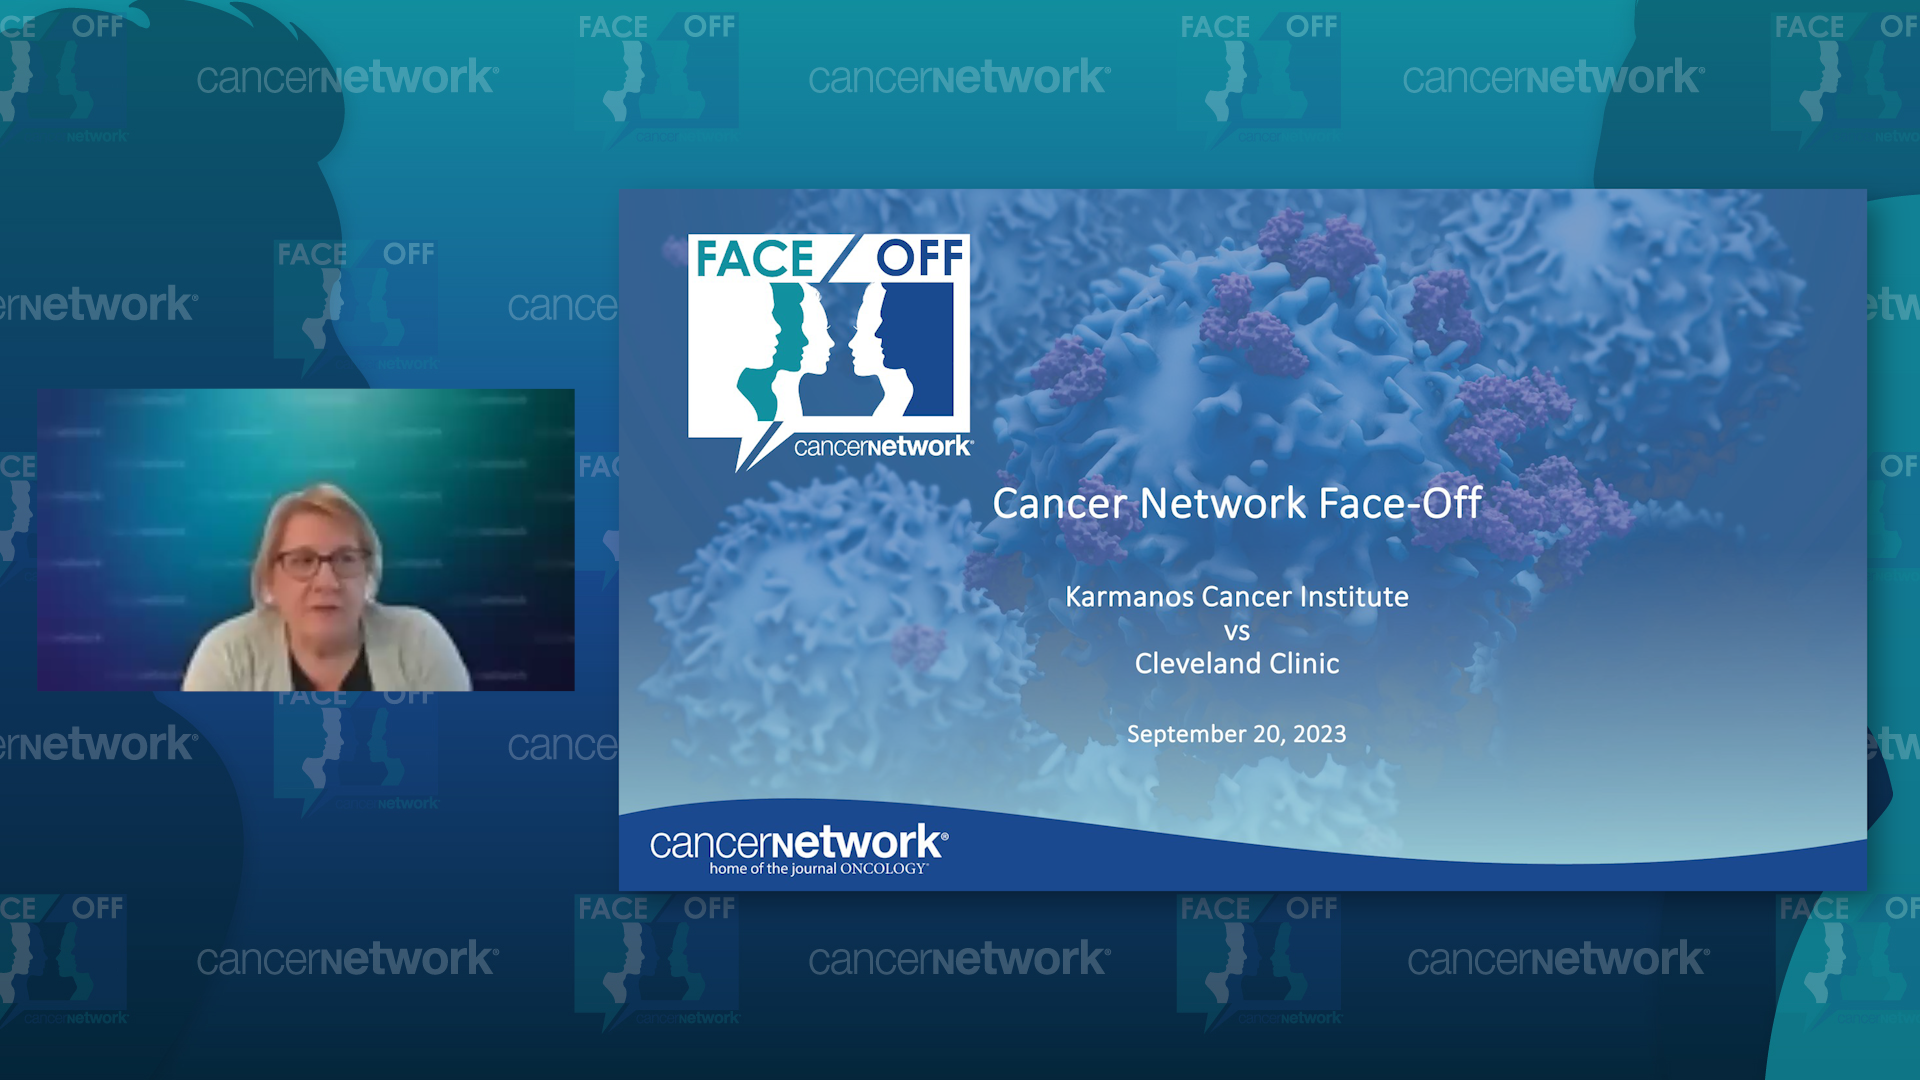 The host of Cancer Network's Face-Off program shown with an introductory slide